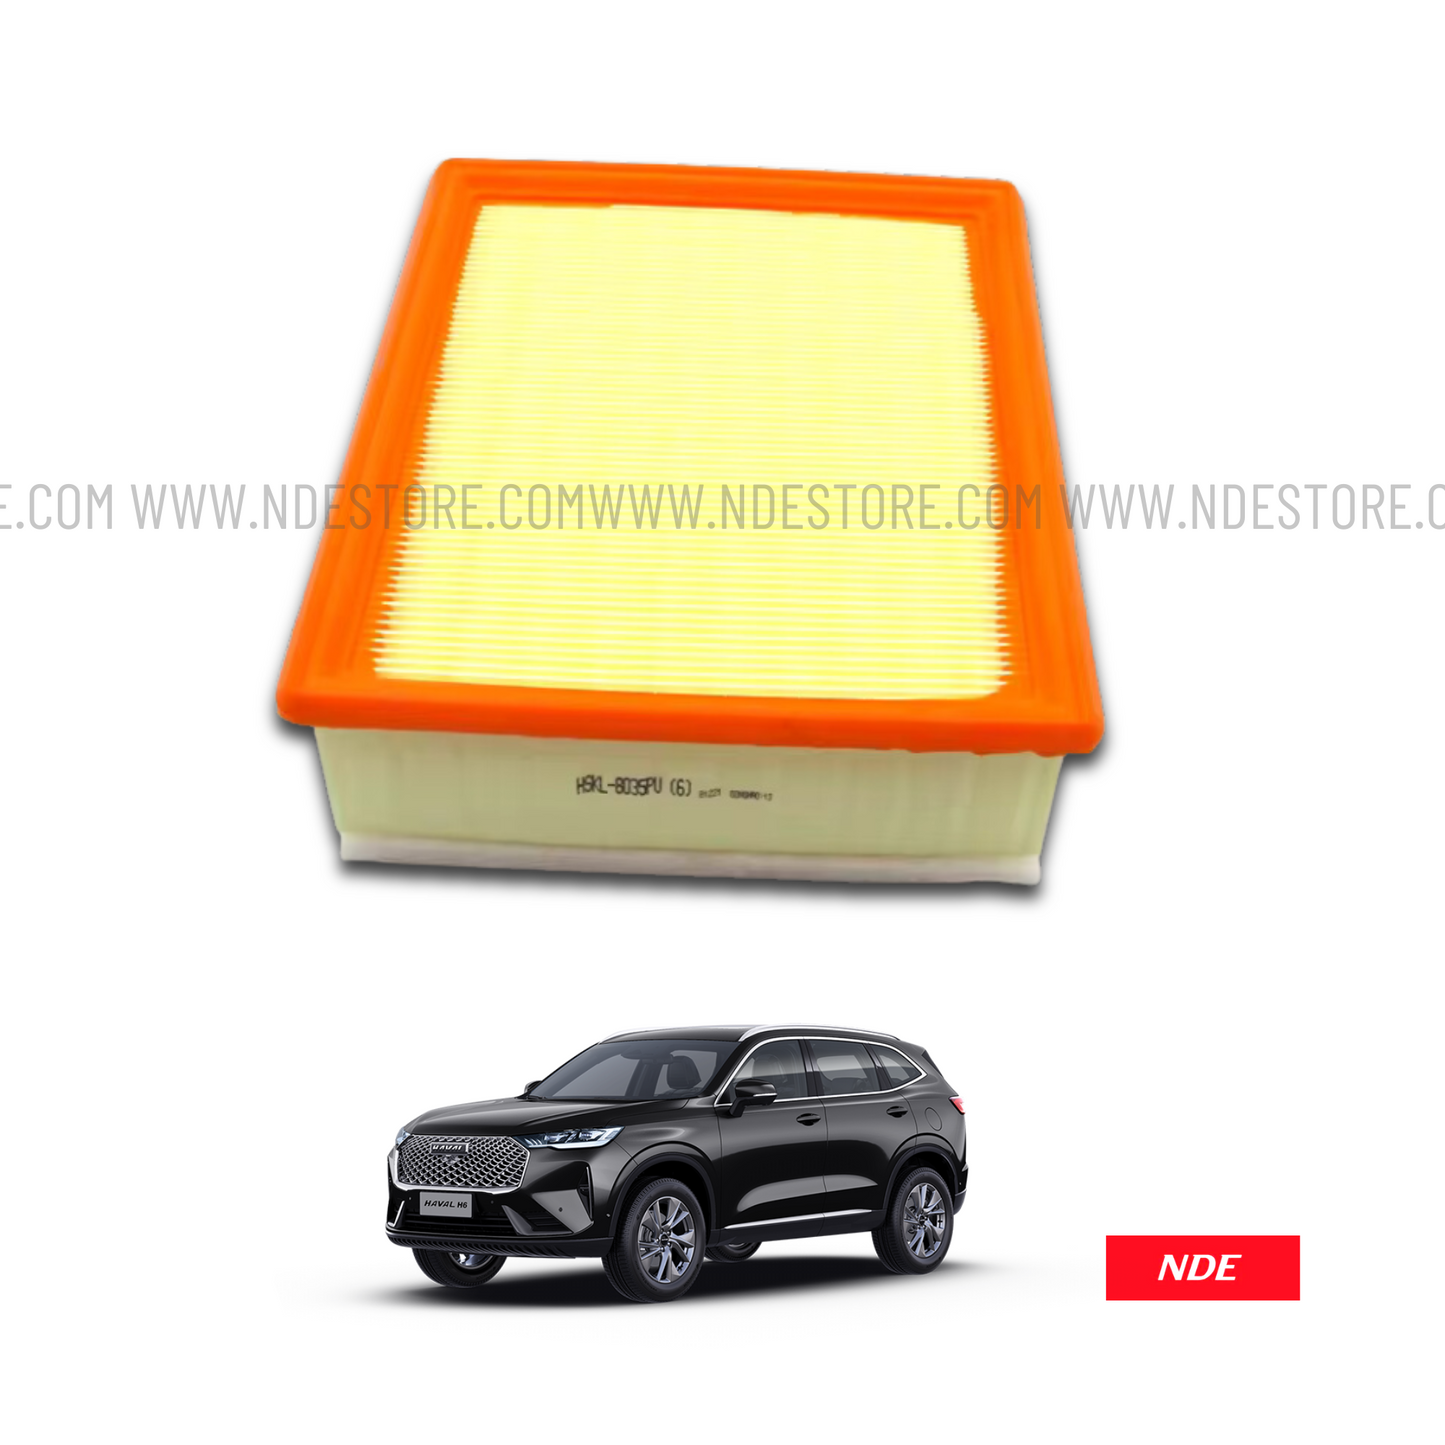 AIR FILTER ELEMENT SUB ASSY IMPORTED FOR HAVAL H6